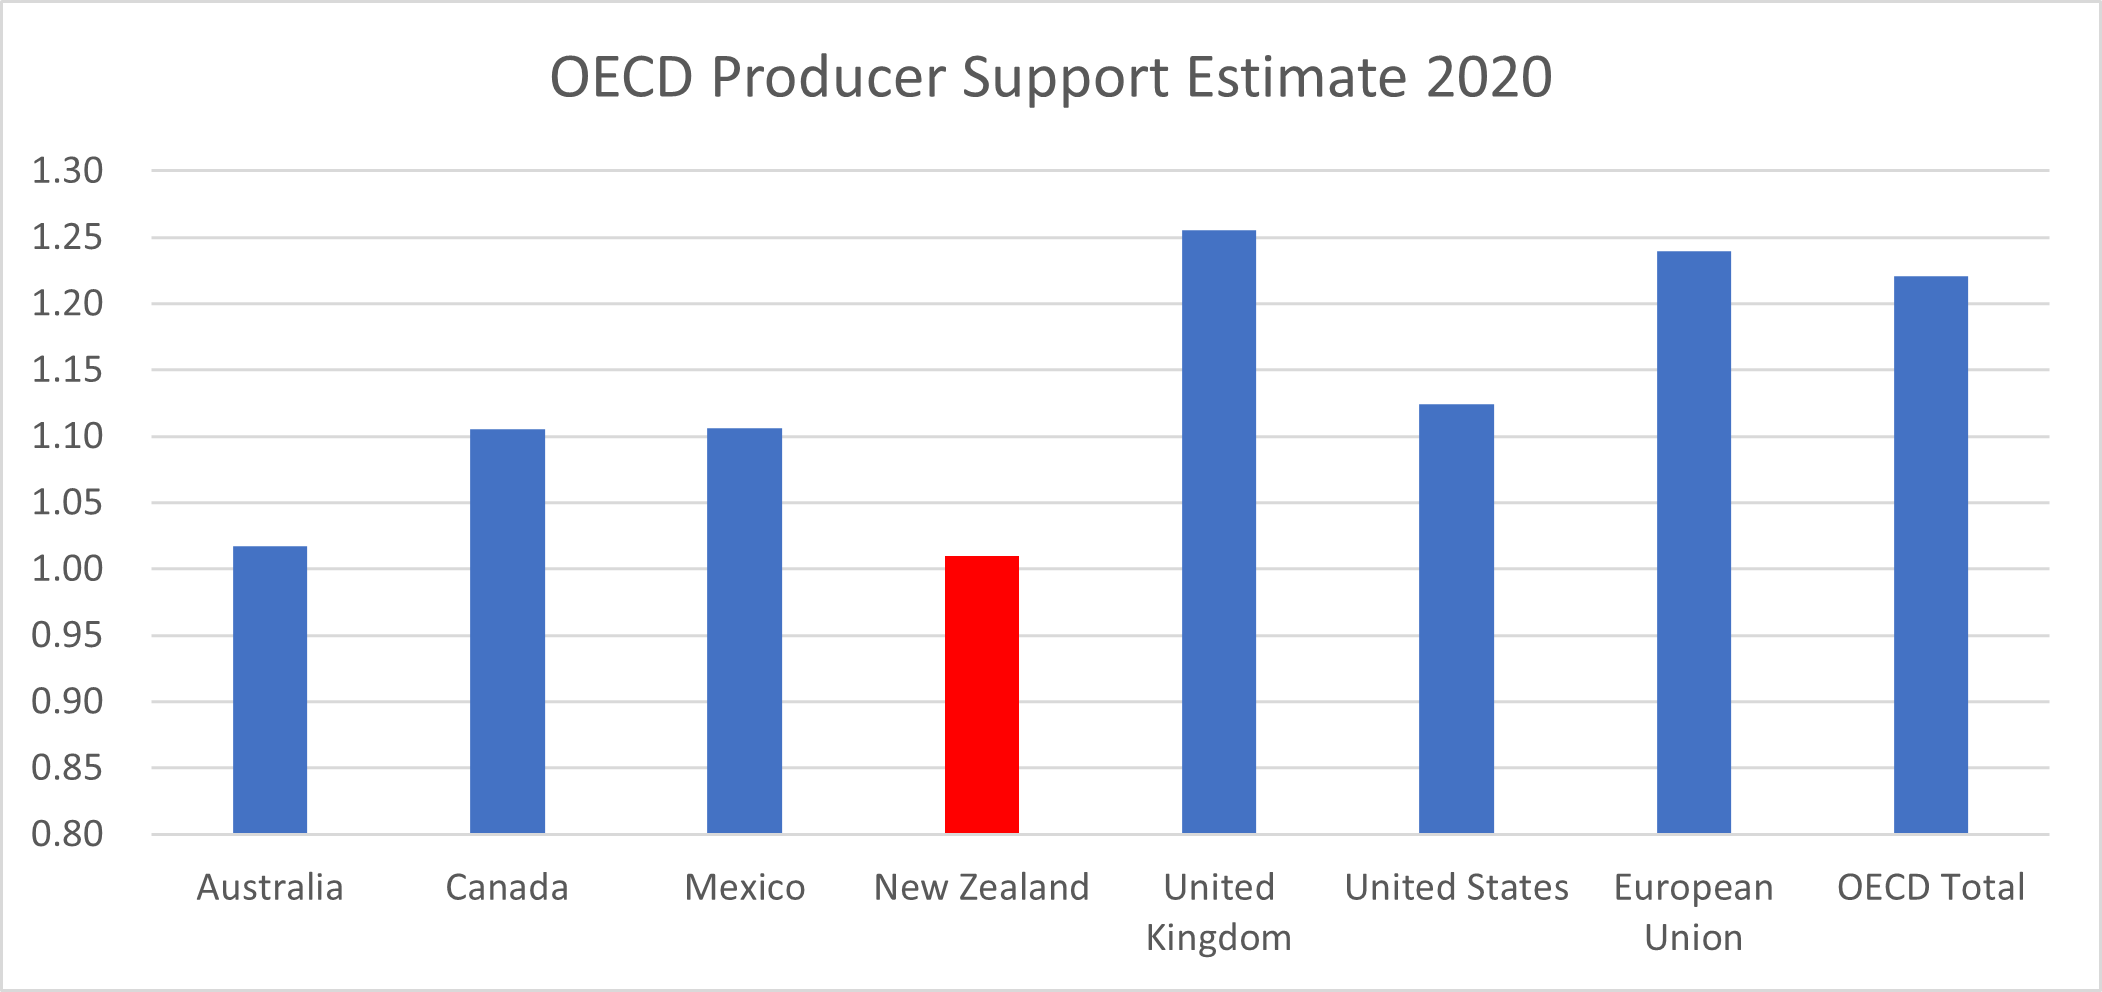 OECD Producer Support Estimate 2020